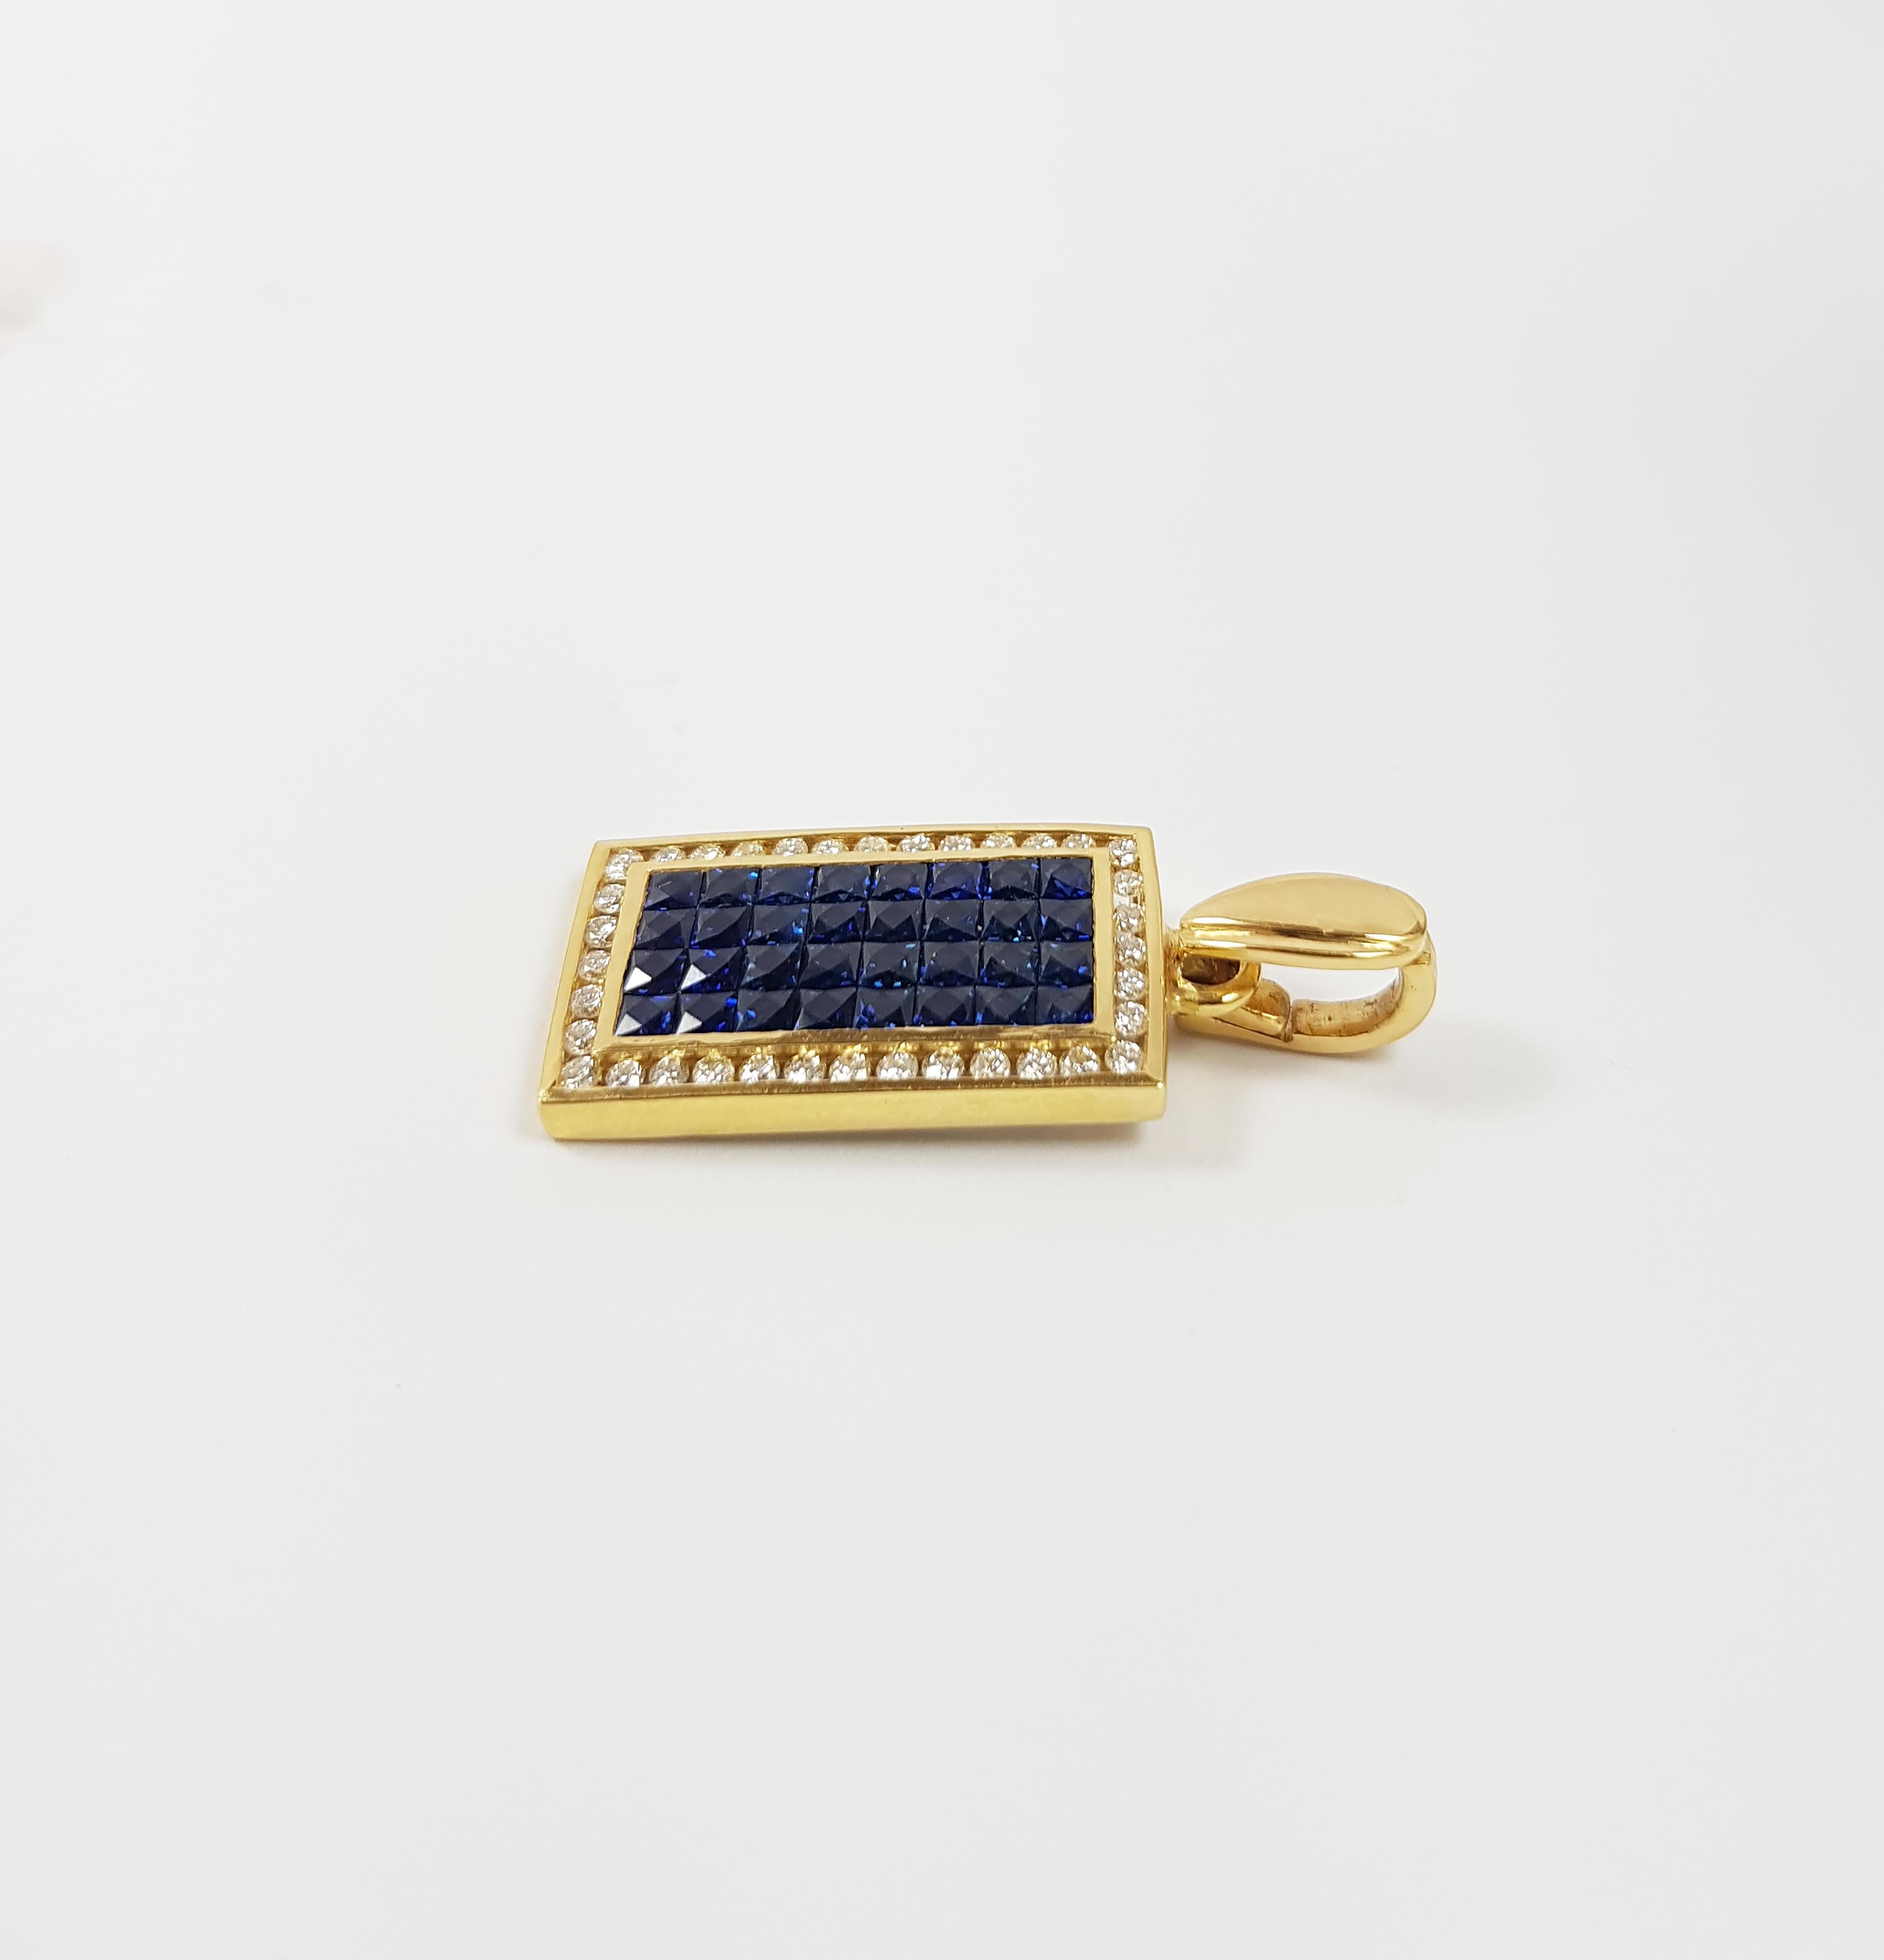 Blue Sapphire 3.20 carats with Diamond 0.42 carat Pendant set in 18 Karat Gold Settings
(chain not included)

Width: 1.3 cm
Length: 3.0 cm 

